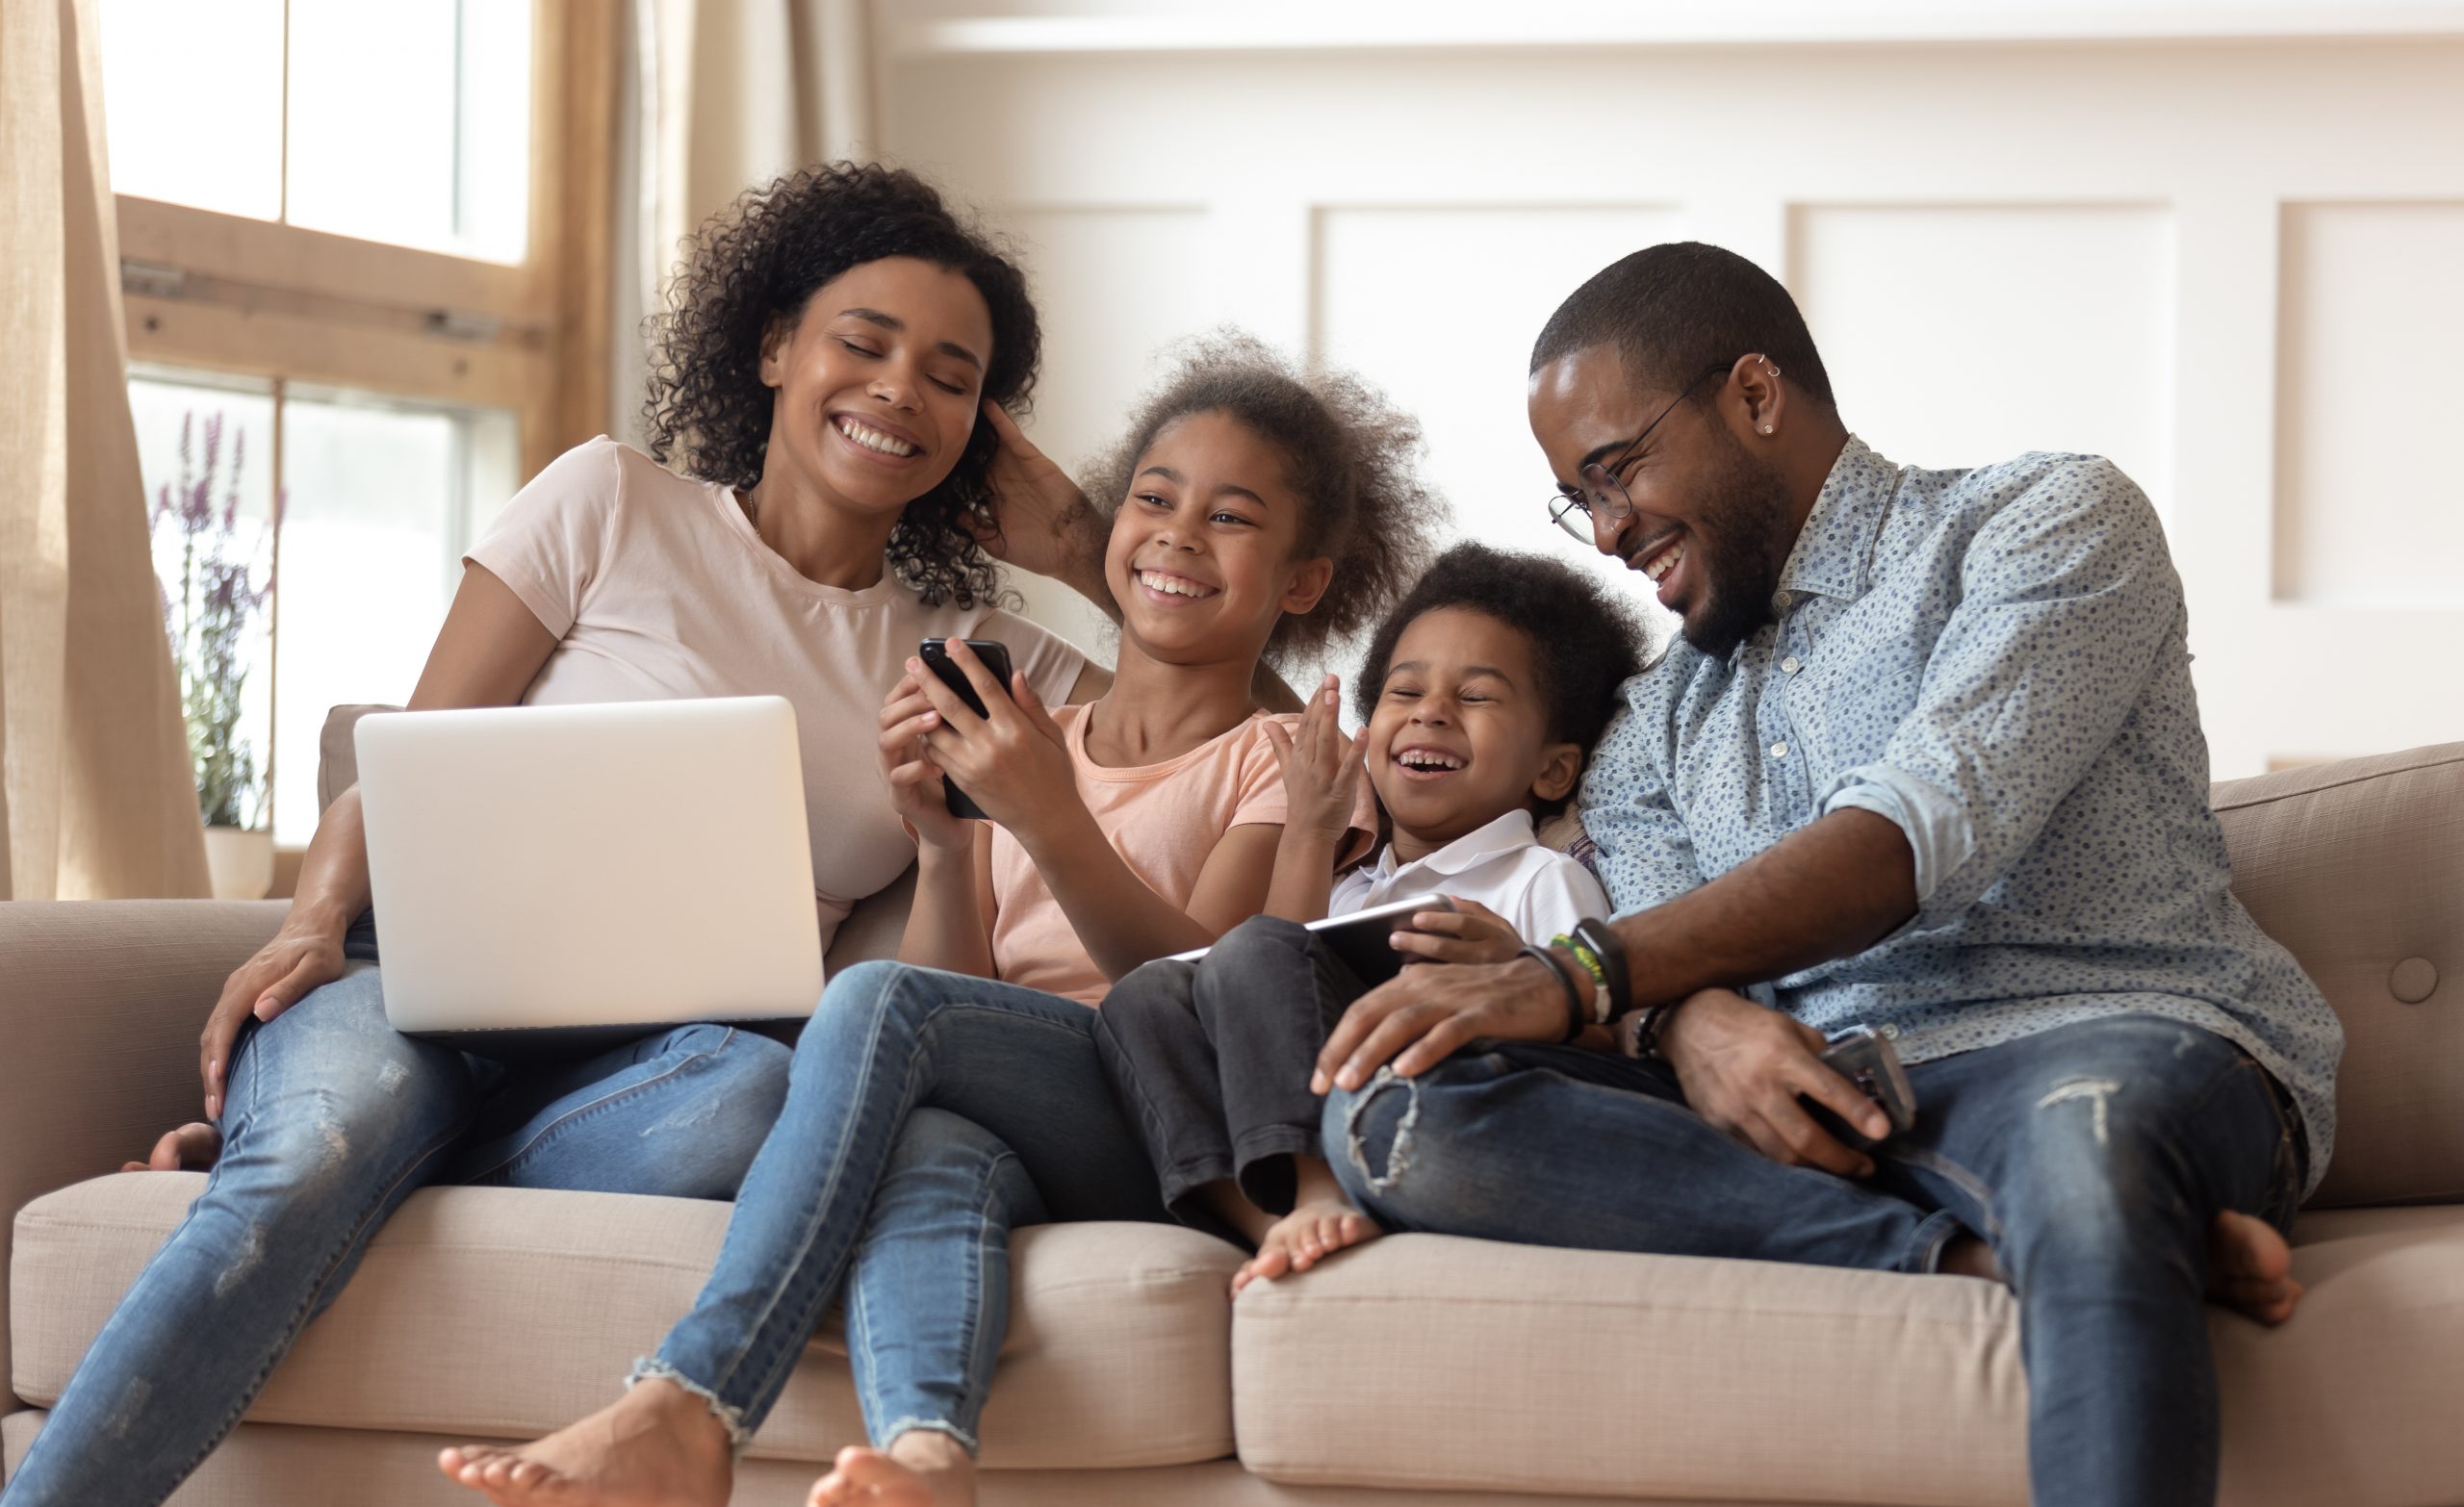 Cheerful african parents and kids laugh use devices together sit on sofa, tech addicted family with children hold laptop phone digital tablet having fun with gadgets at home, technology dependence